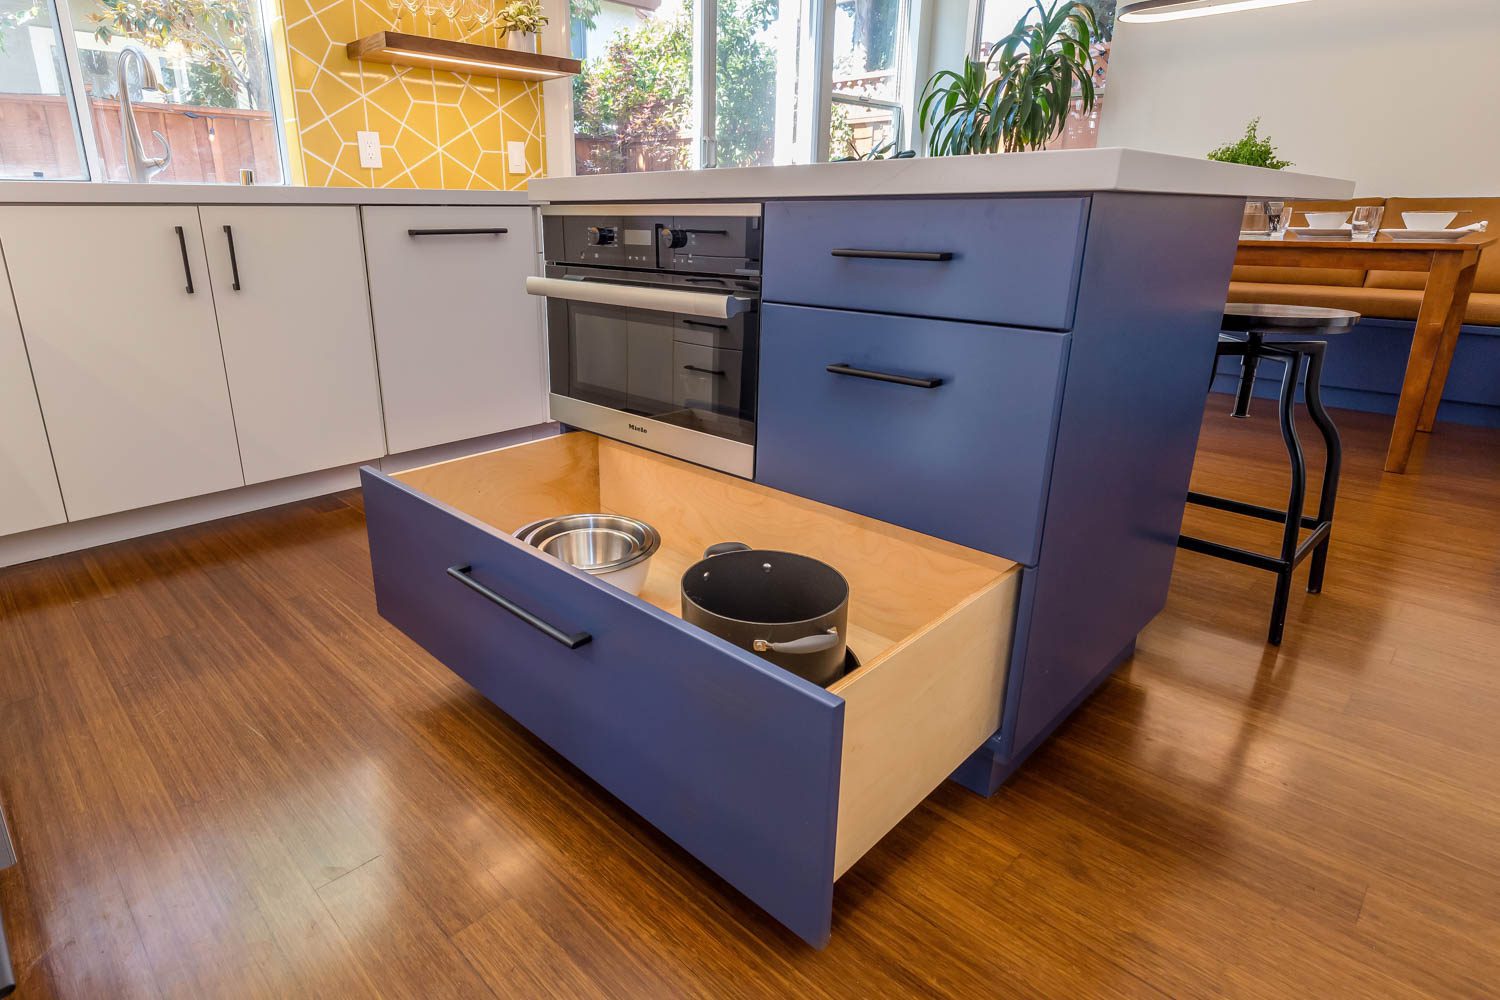 One-kitchen-remodel-mistake-is-the-lack-of-storage-space